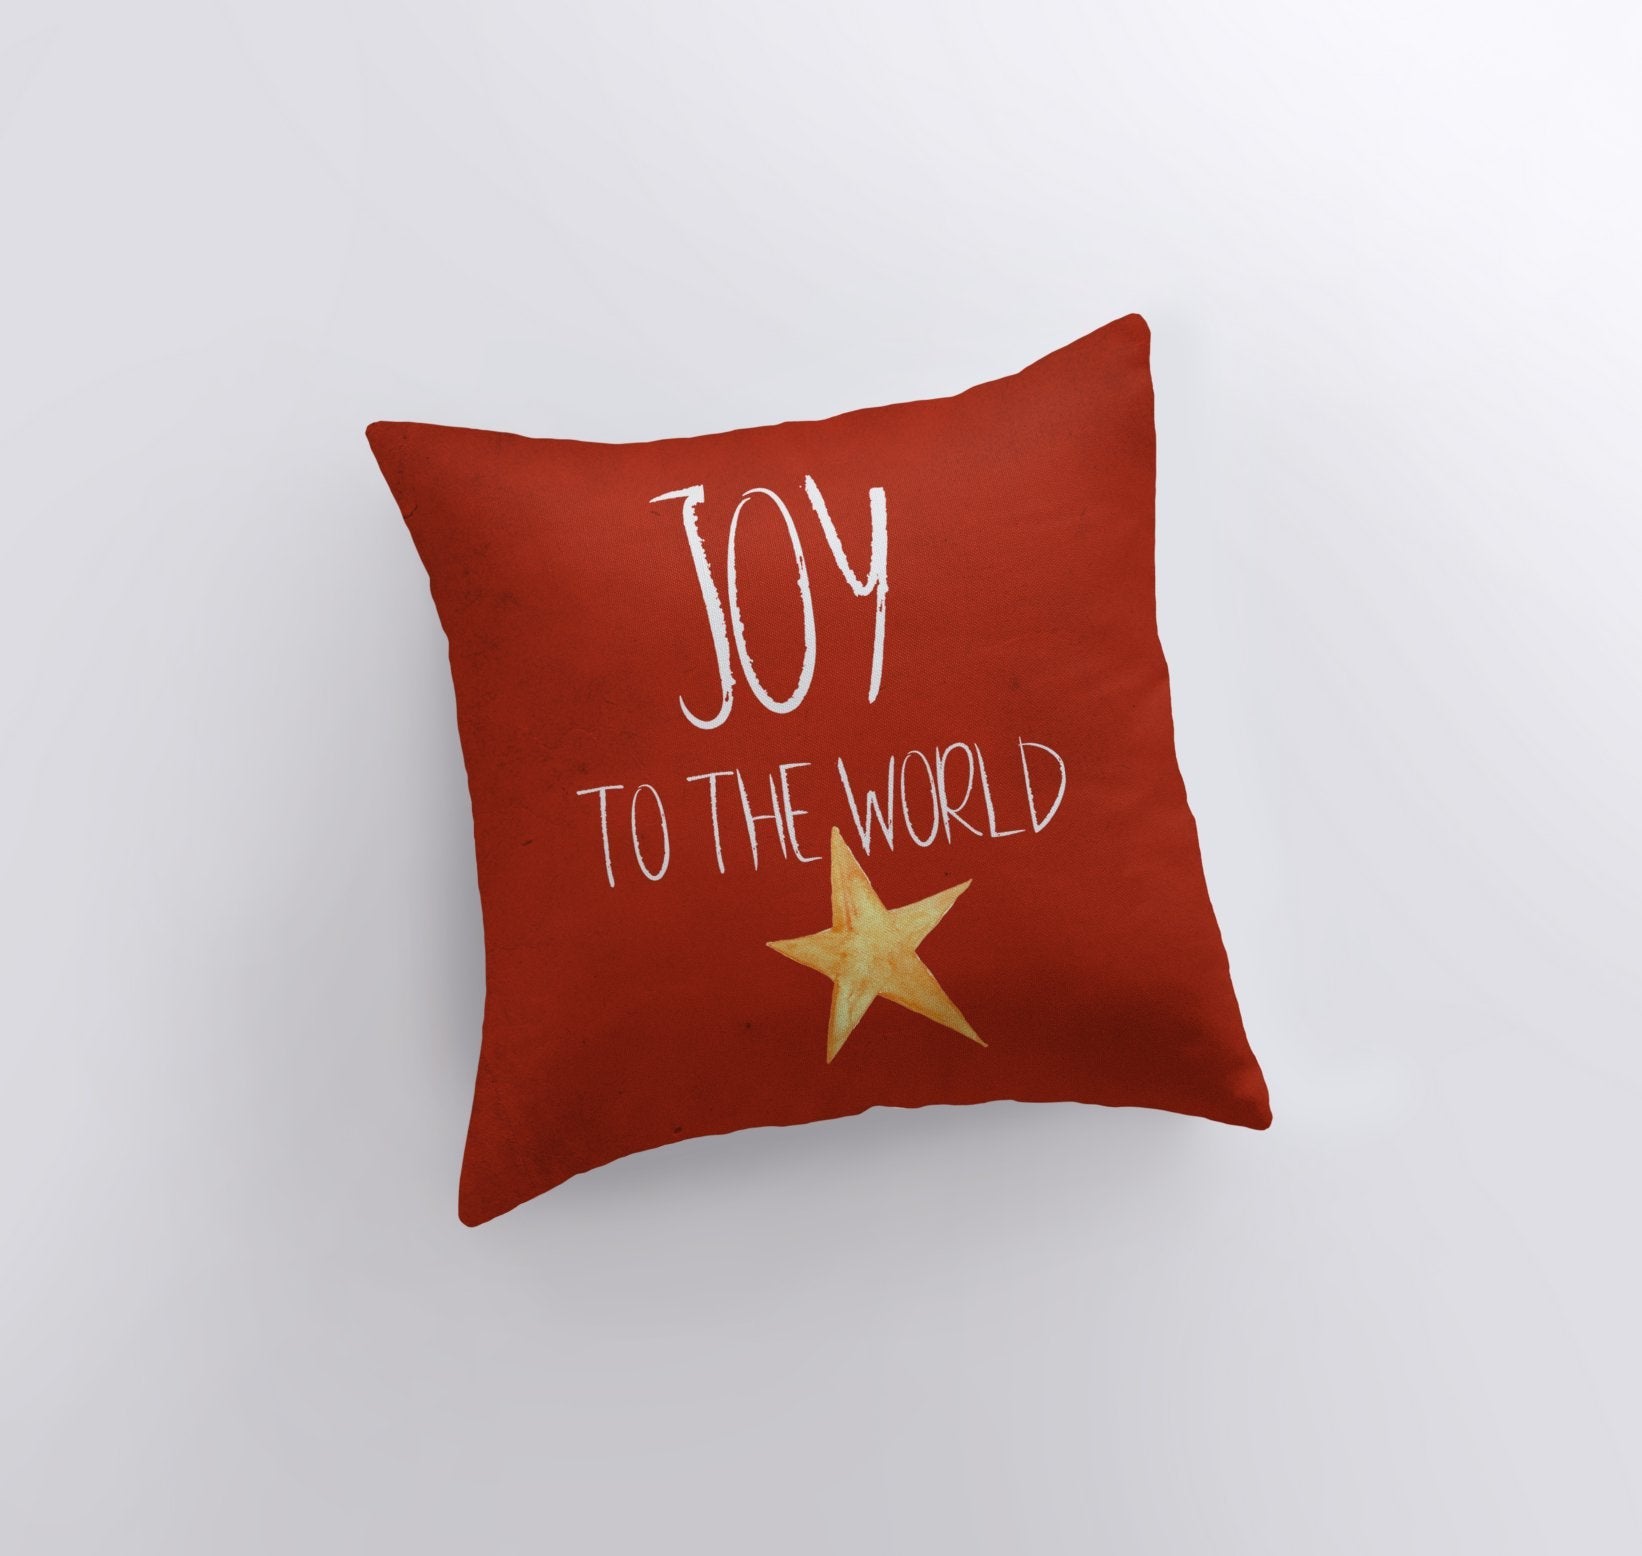 Buy Joy to the World Red Throw Pillow Cover by UniikPillows